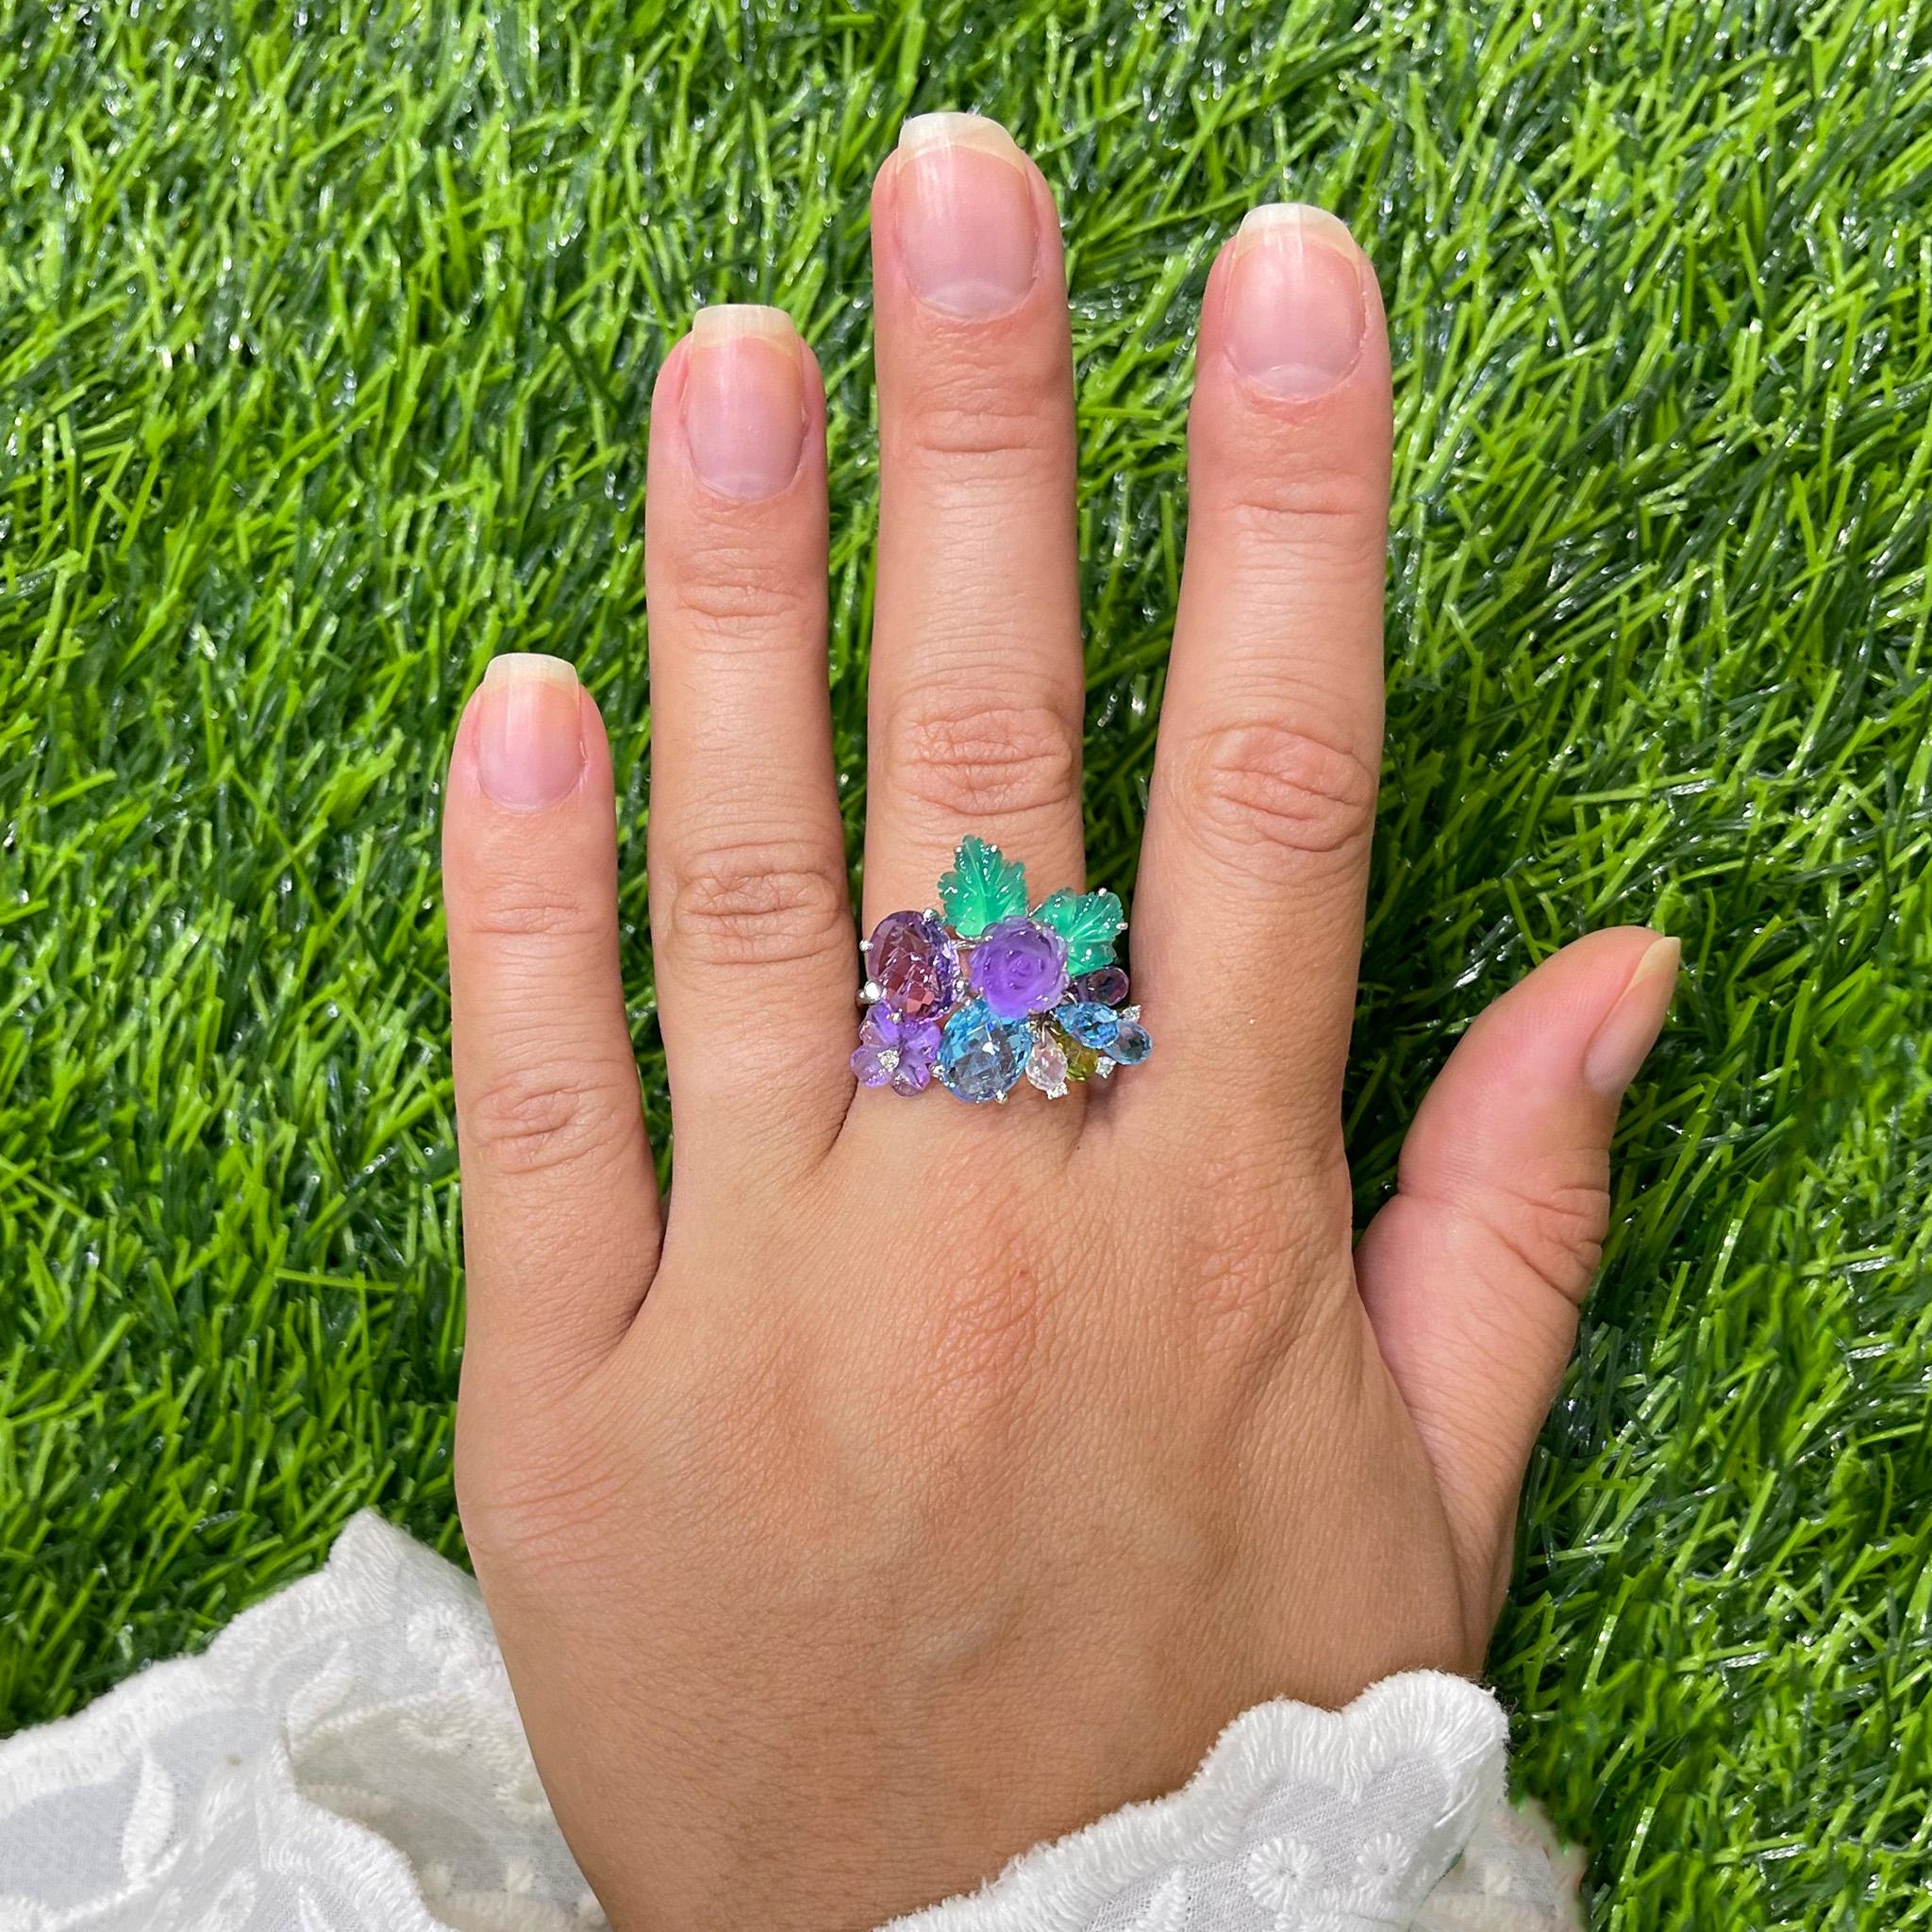 Beautiful Flower Cocktail Ring Set With Colored Stones (Topaz, Amethyst, Diamonds, etc)
The ring has moving part. It give a ring extra sparkle while wearing. It comes with an appraisal by GIA G.G.
Total Carat Weight of all Gemstones is 4.95